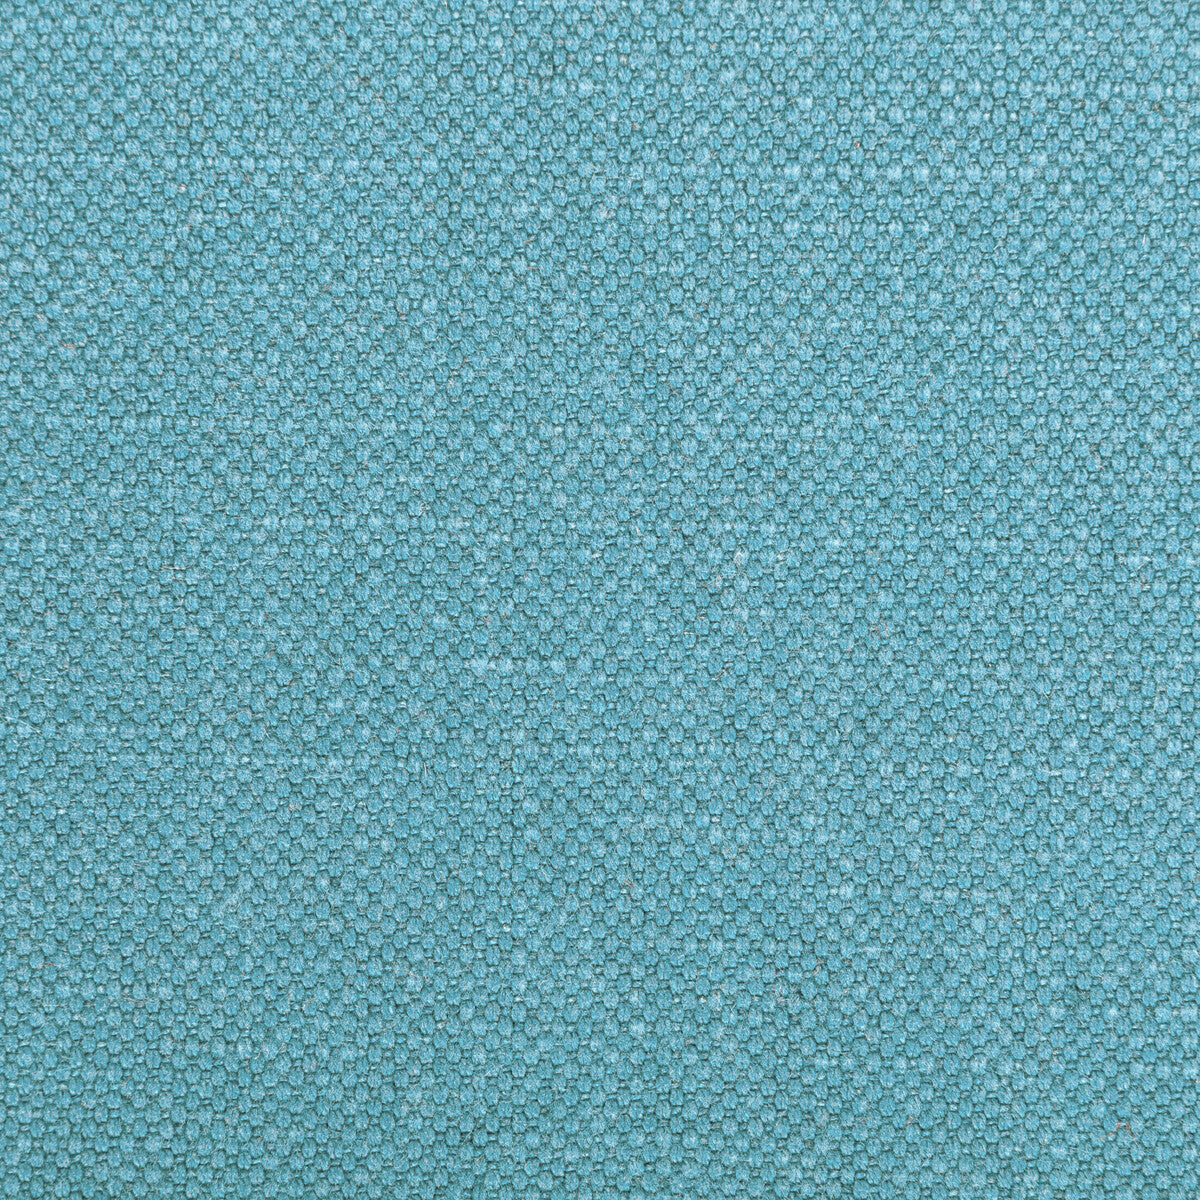 Carson fabric in sky color - pattern 36282.1155.0 - by Kravet Basics